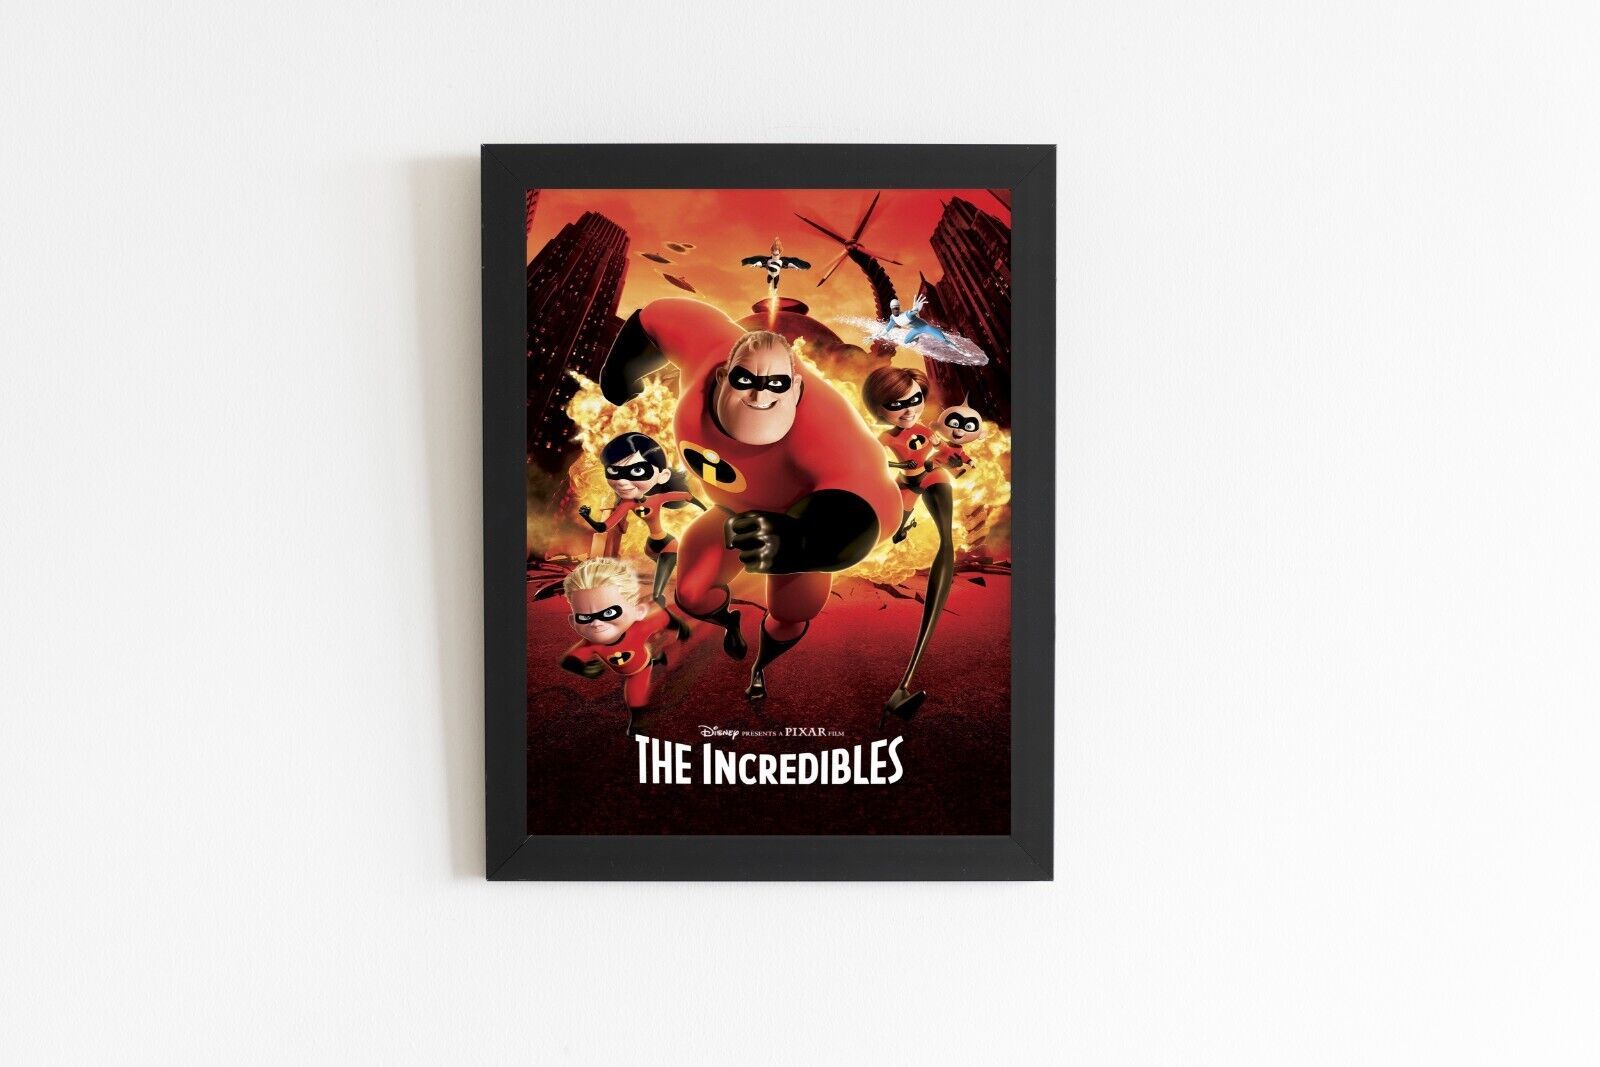 Primary image for The Incredibles Movie Poster (2004) - 20" x 30" inches (Framed)